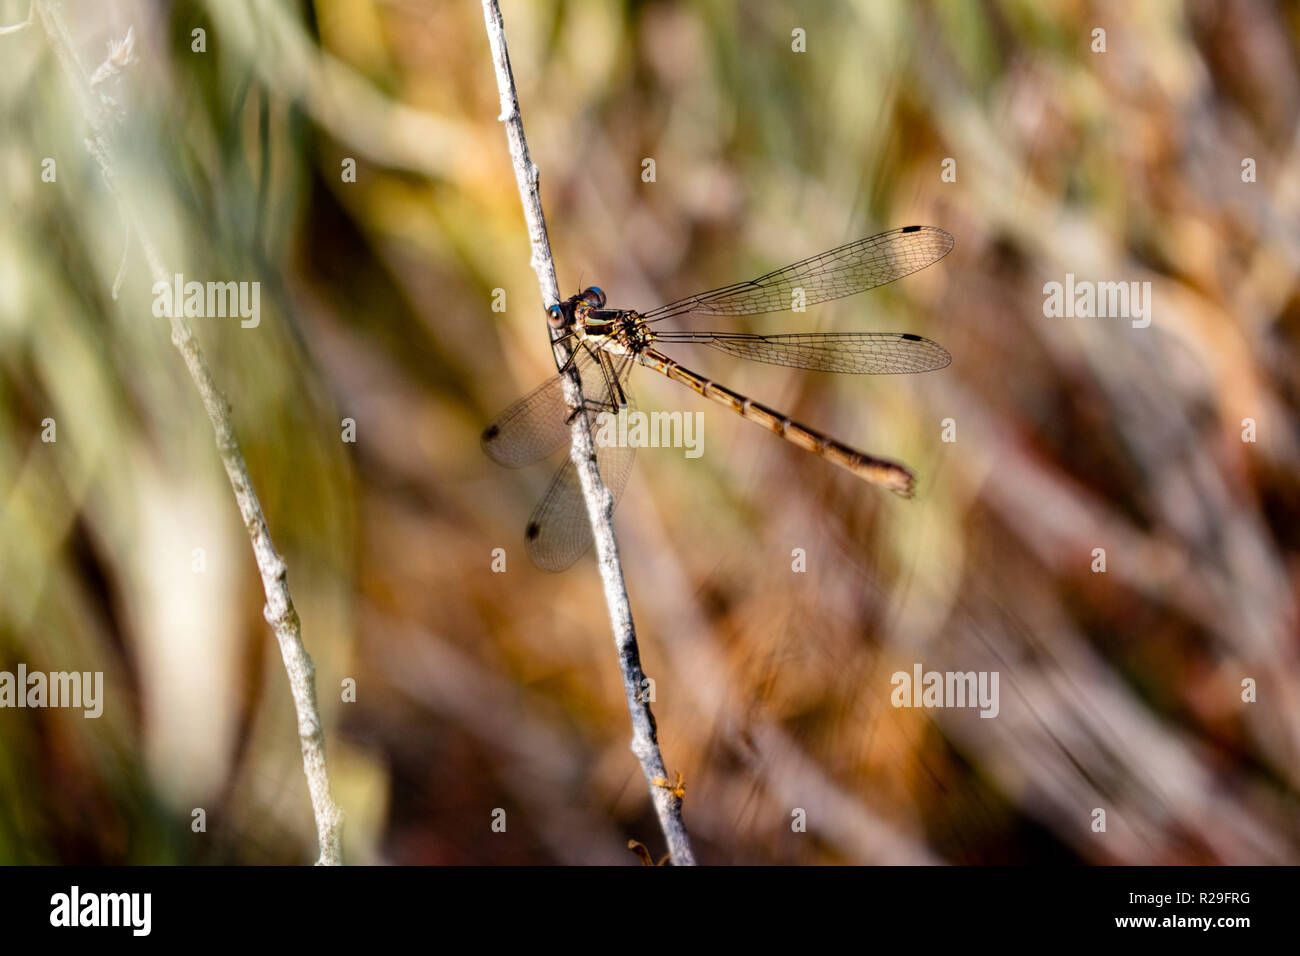 This is a picture of a dragonfly with its wings spread out and its hands holding on to a grayish stem. Stock Photo